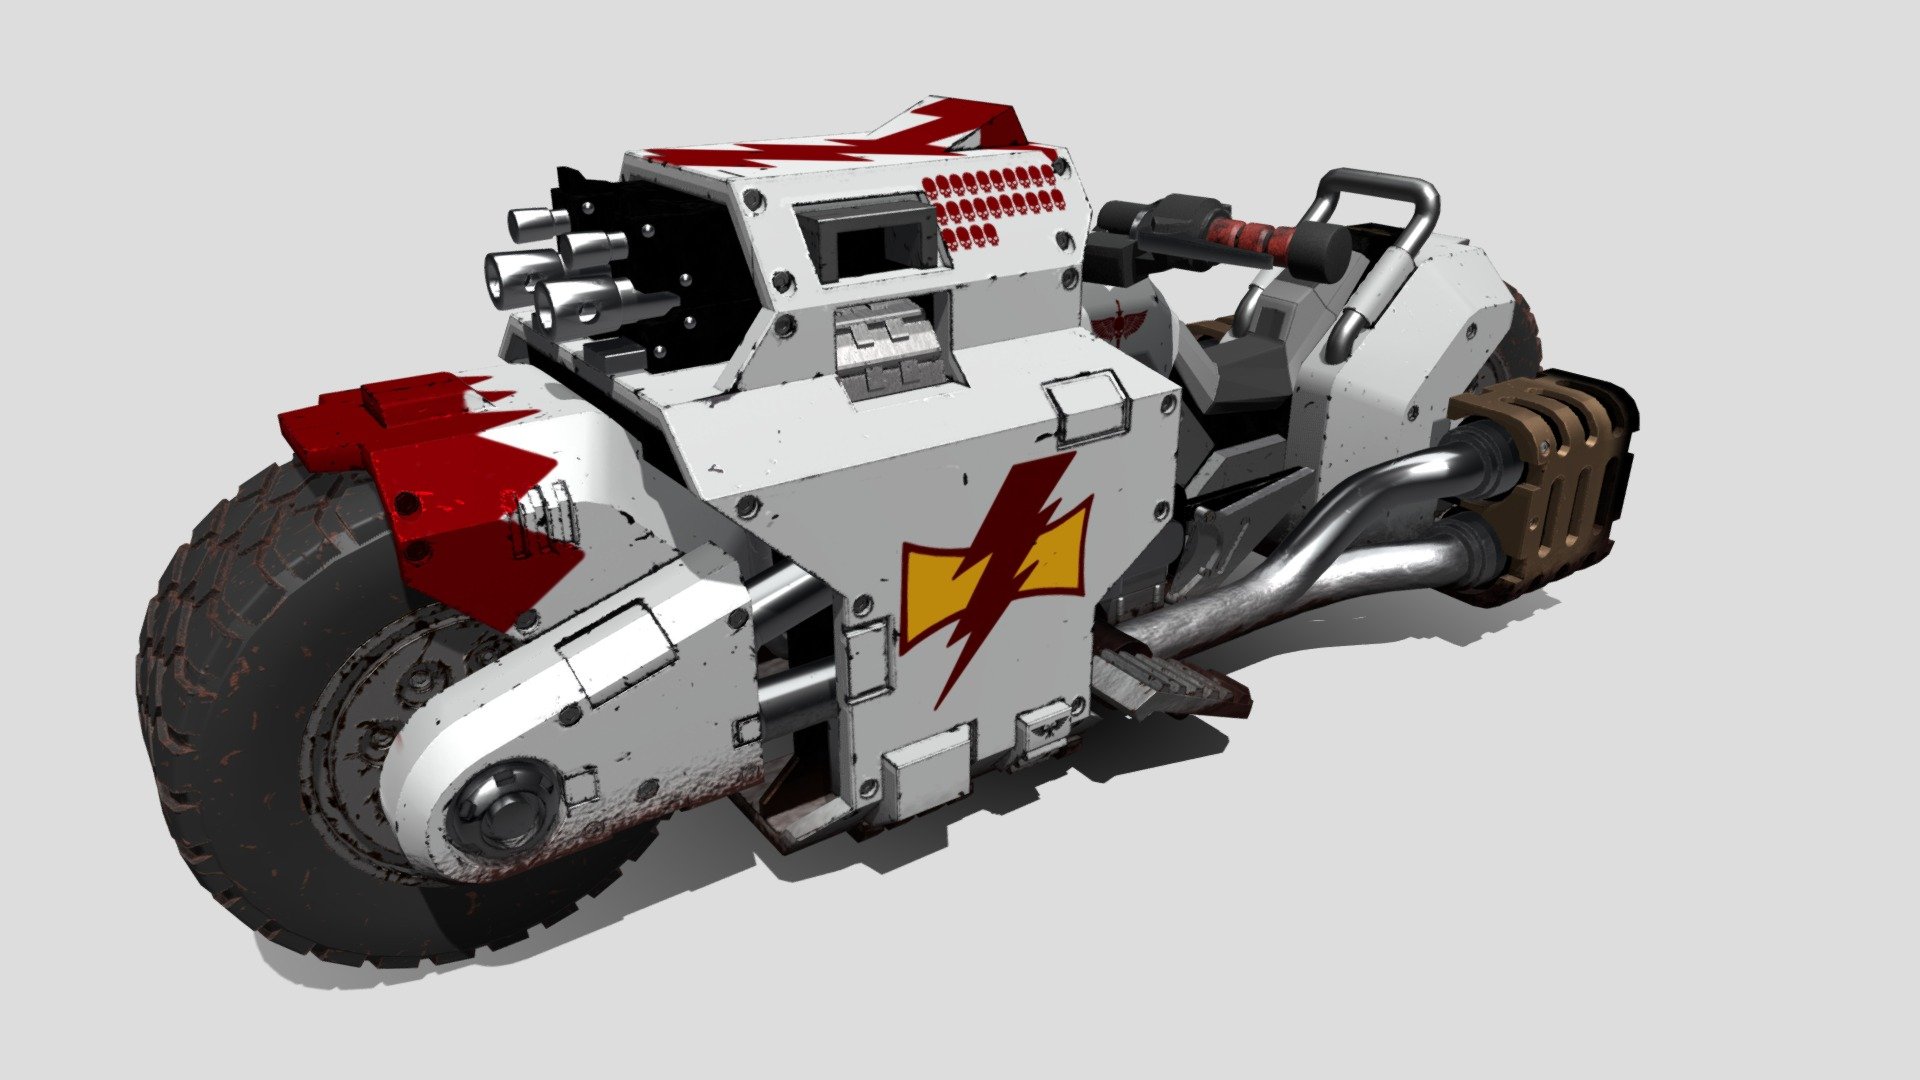 A motorcycle of the Warhammer 40k Universe. This one is painted with the colors and emblems of the &ldquo;White Scars